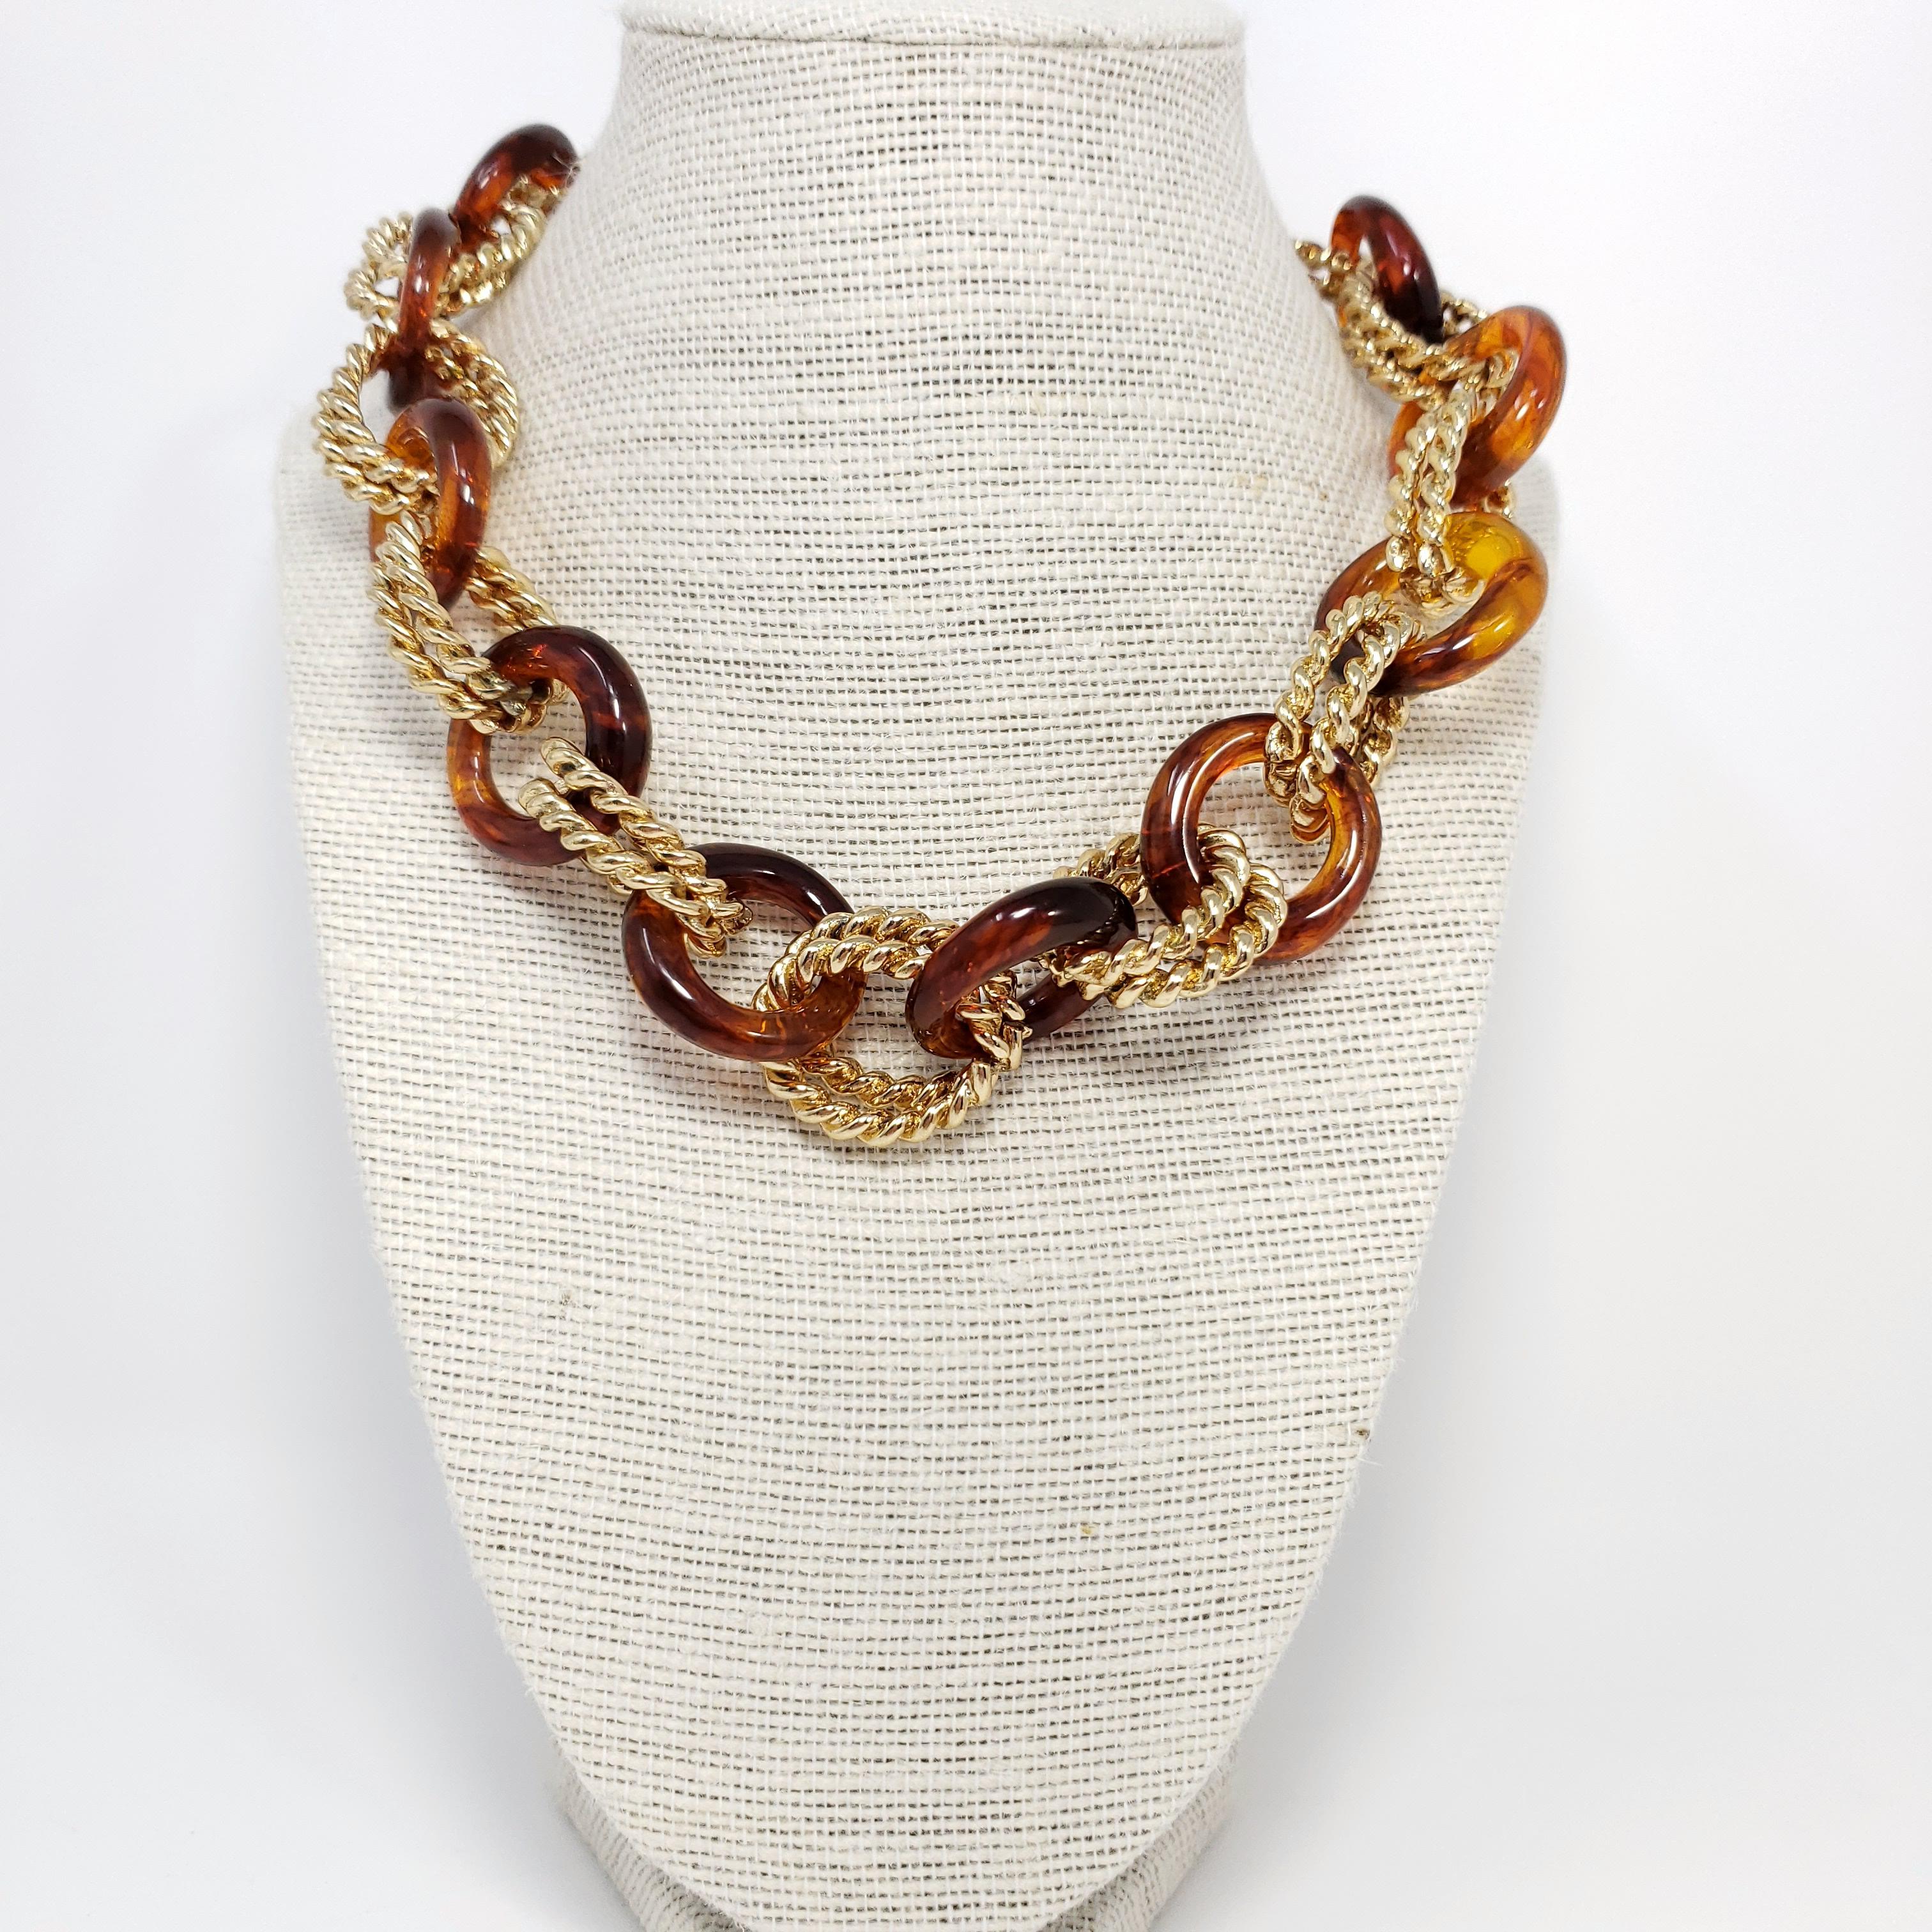 An extravagant link necklace from Kenneth Jay Lane! Features tortoiseshell resin and textured golden rings. A chic necklace for daytime or evening wear.

Toggle clasp.

Hallmarks: KJL
